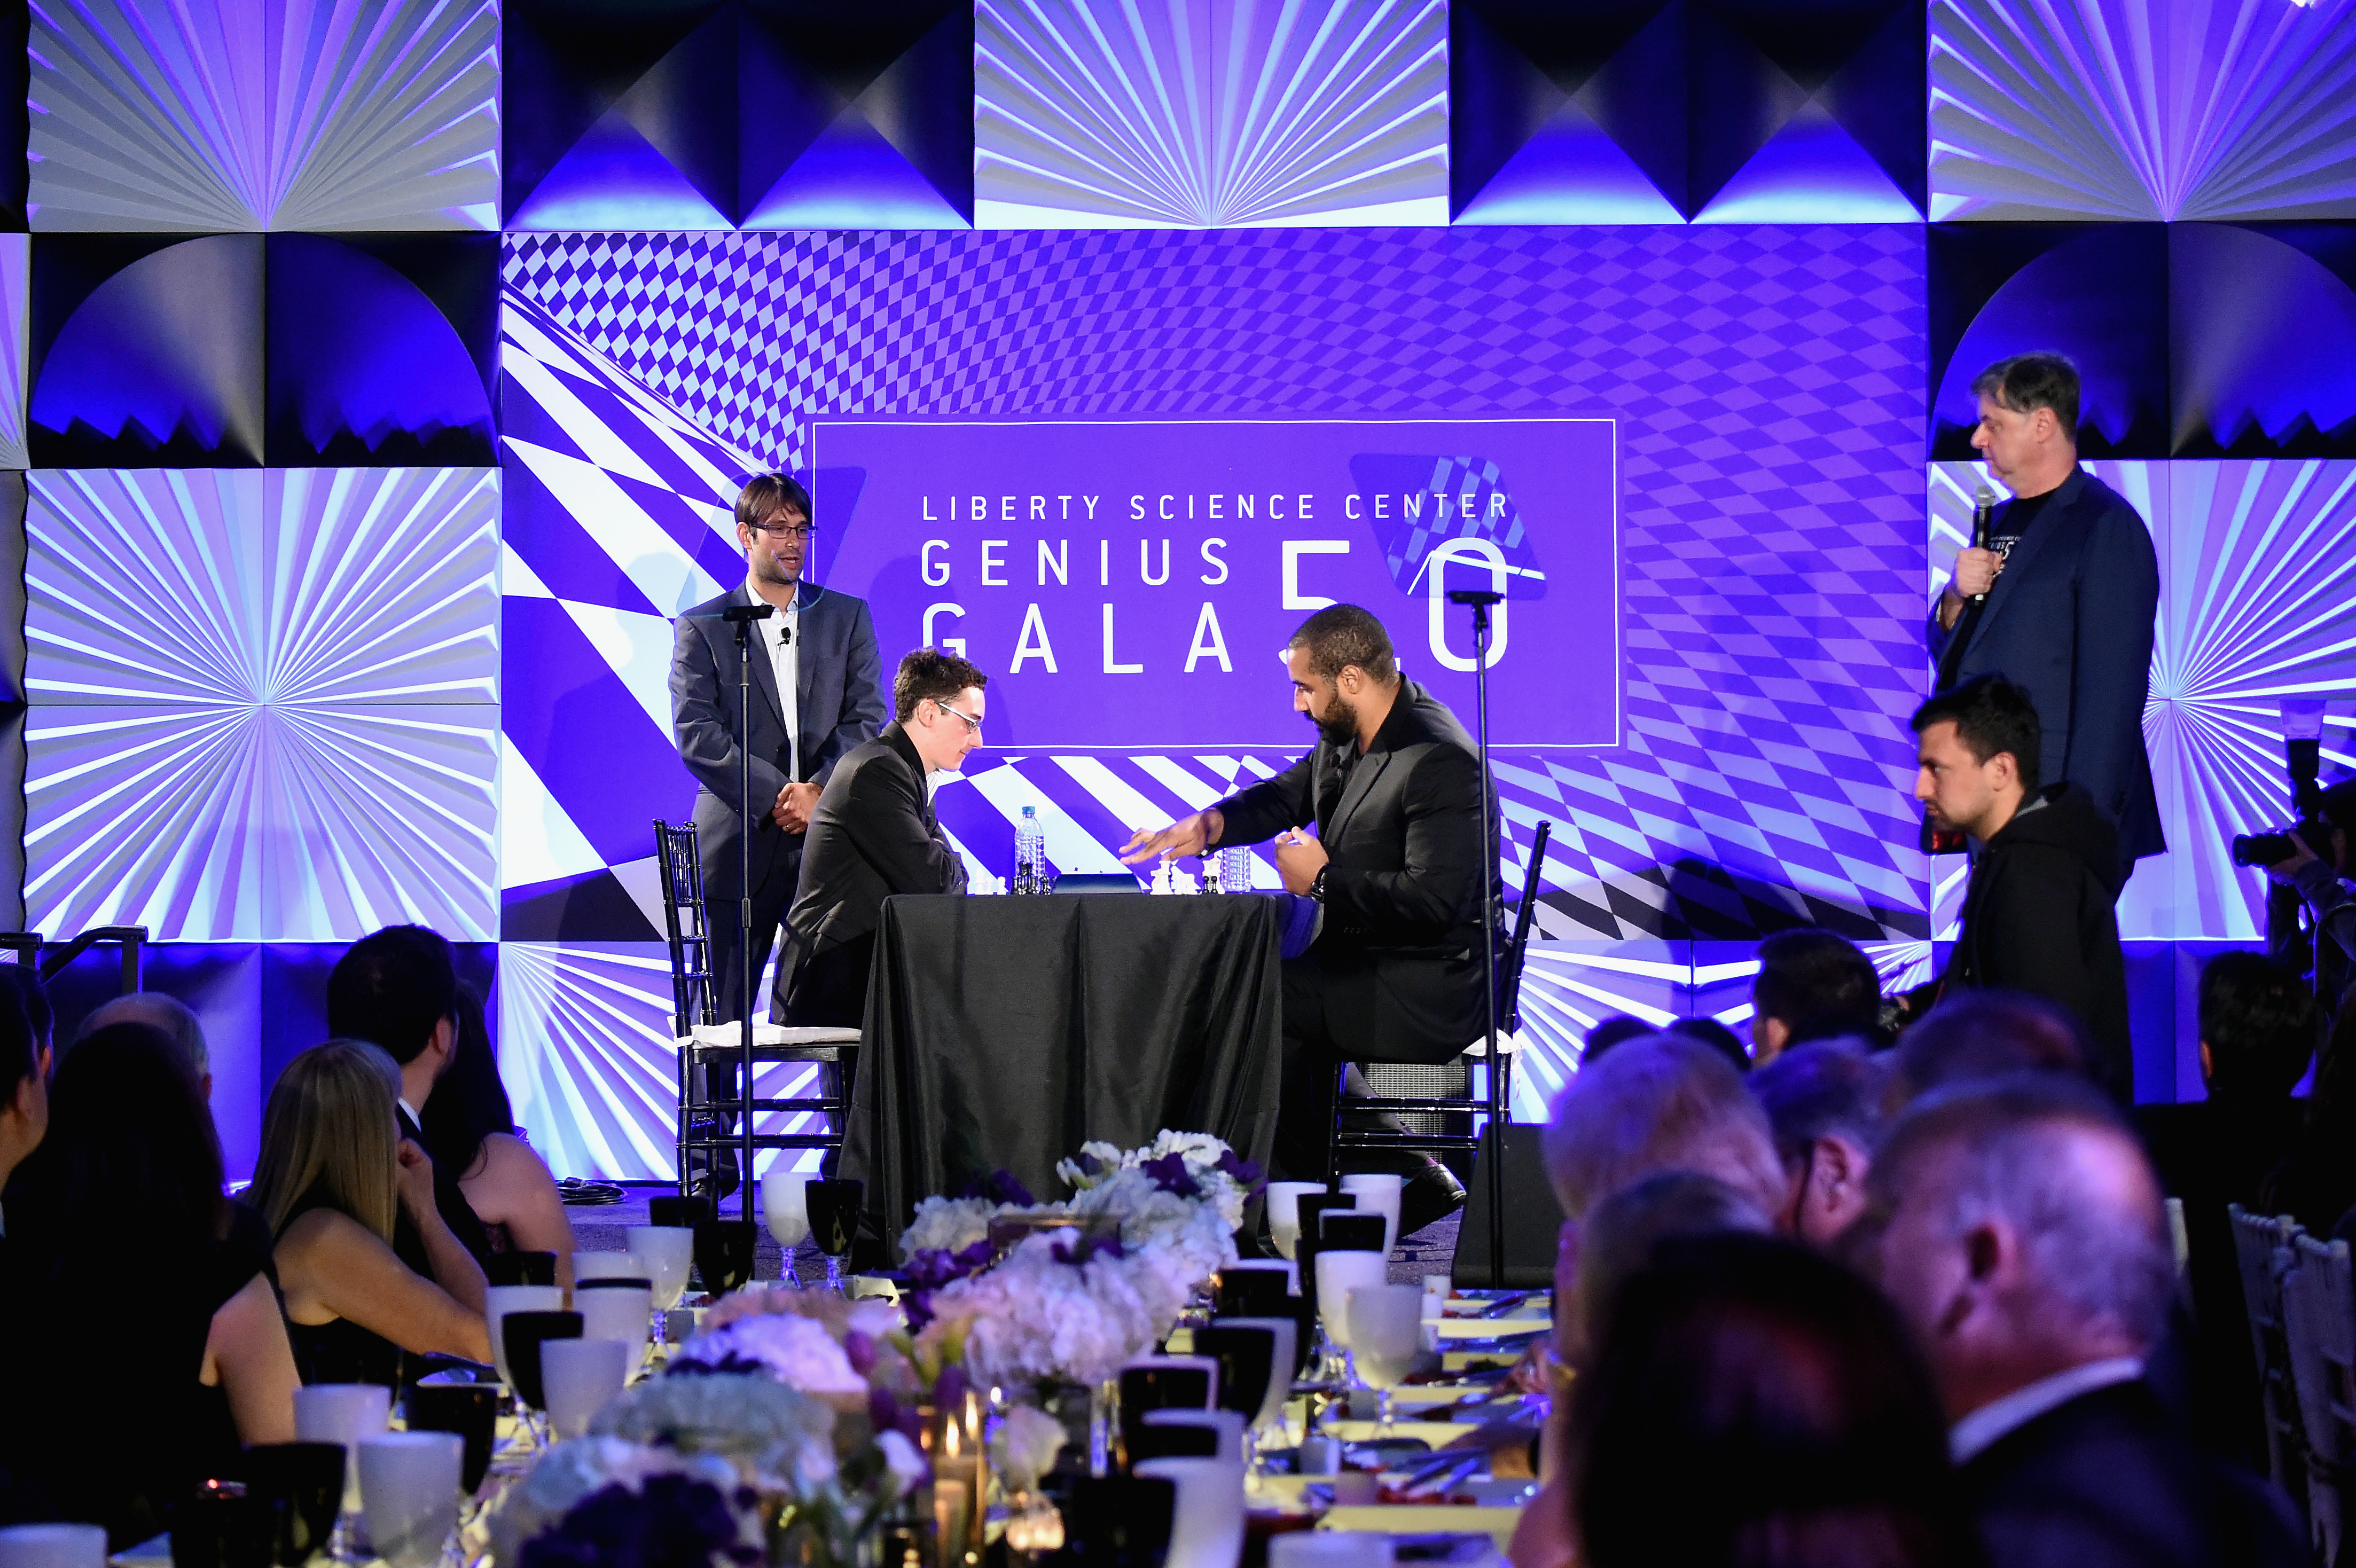 "JERSEY CITY, NJ - MAY 20: US National Chess Champion, Fabiano Caruana, (L), plays NFL Raven and mathematician, John Urschel, challenge eachother in a game of chess onstage at the Liberty Science Center's Genius Gala 5.0 on May 20, 2016 in Jersey City, New Jersey. (Photo by Mike Coppola/Getty Images for Liberty Science Center)"